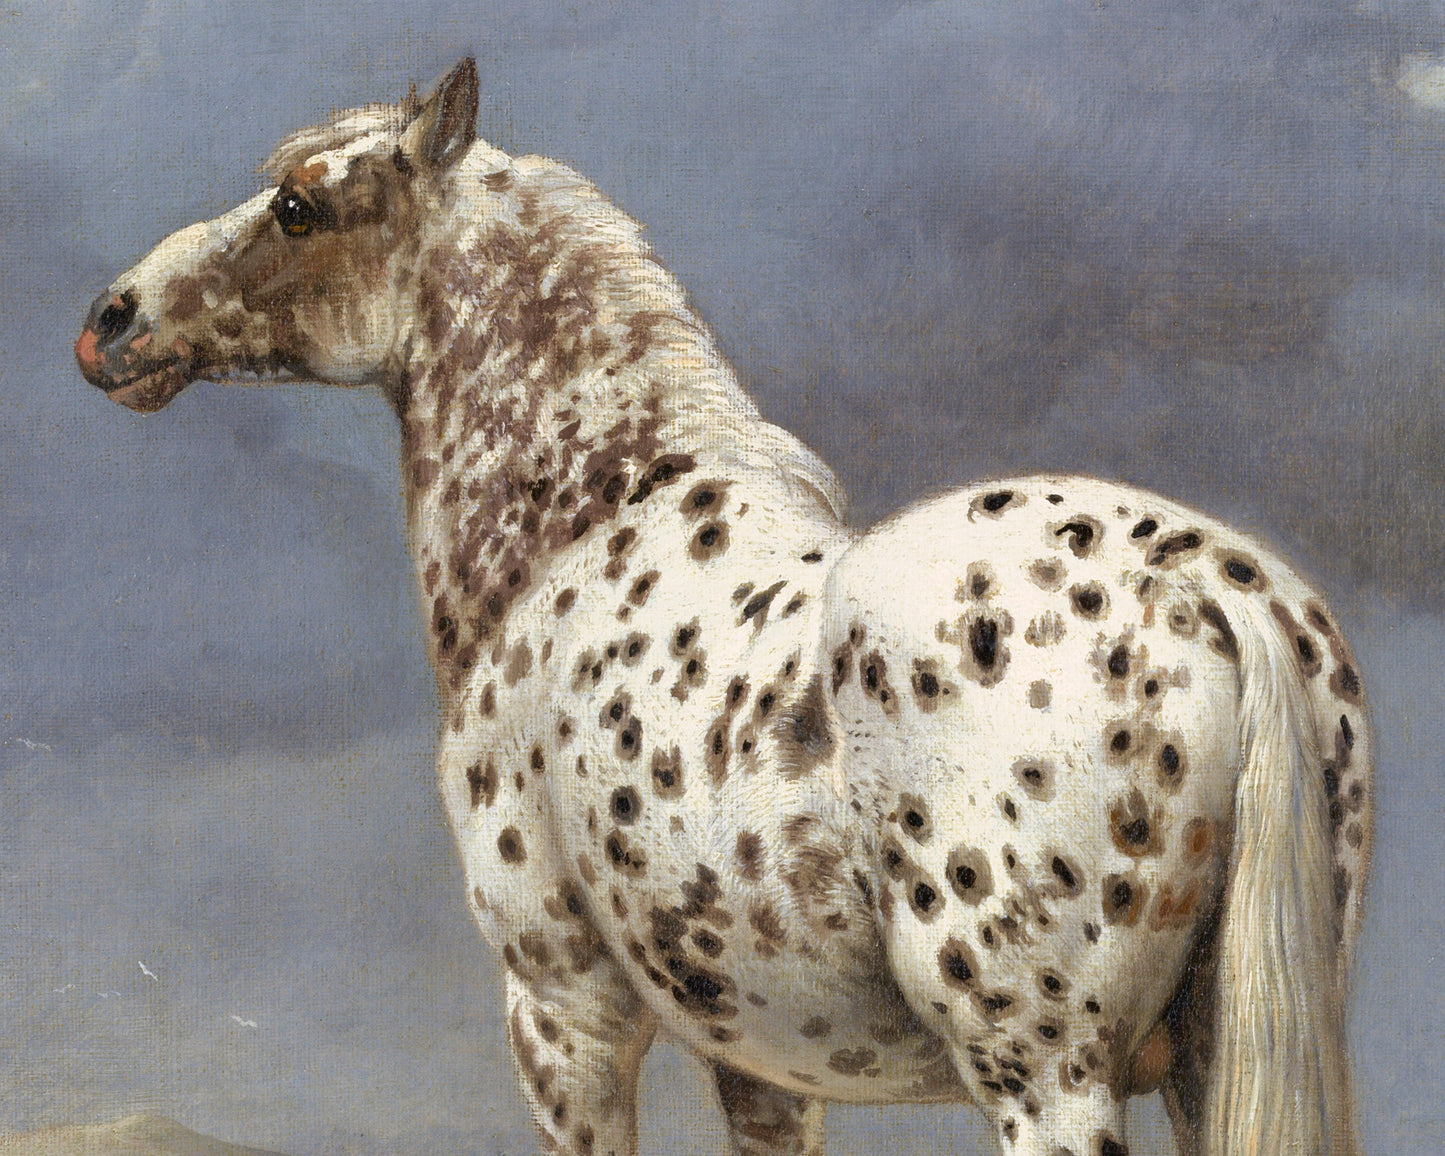 Spotted horse art print | Antique piebald horse | Animal fine art | Vintage equine painting | Horse wall art | Farm and ranch decor